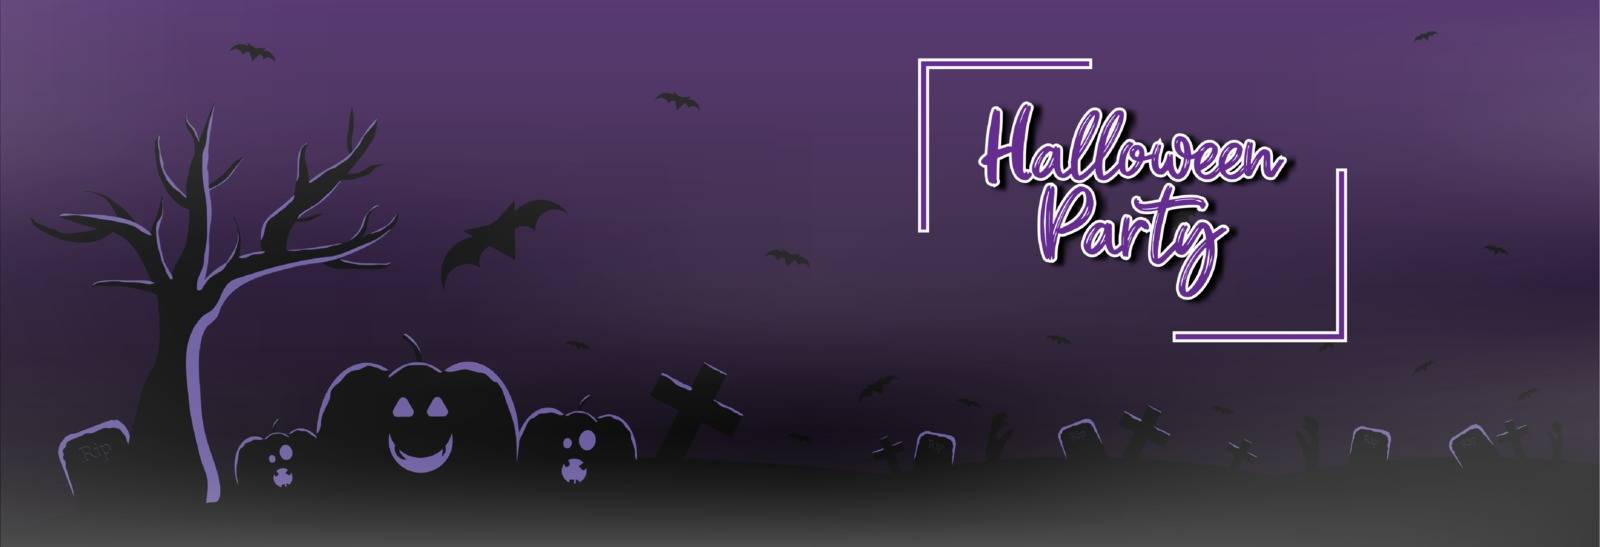 Happy Halloween holiday by Foryou13